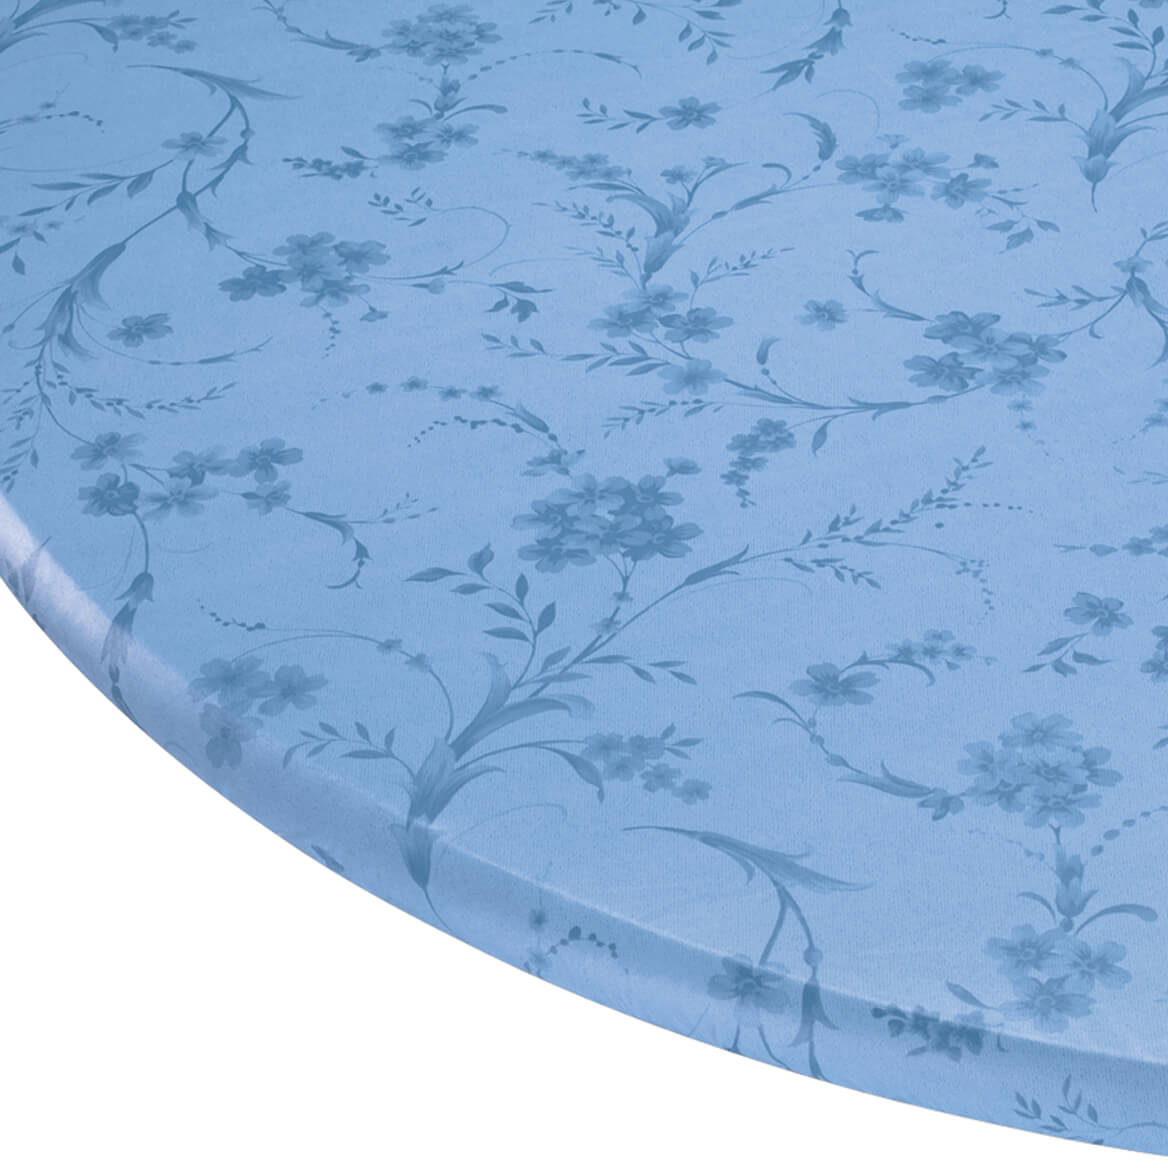 Floral Swirl Elasticized Table Cover-42"x68" Oval-Blue - image 1 of 3